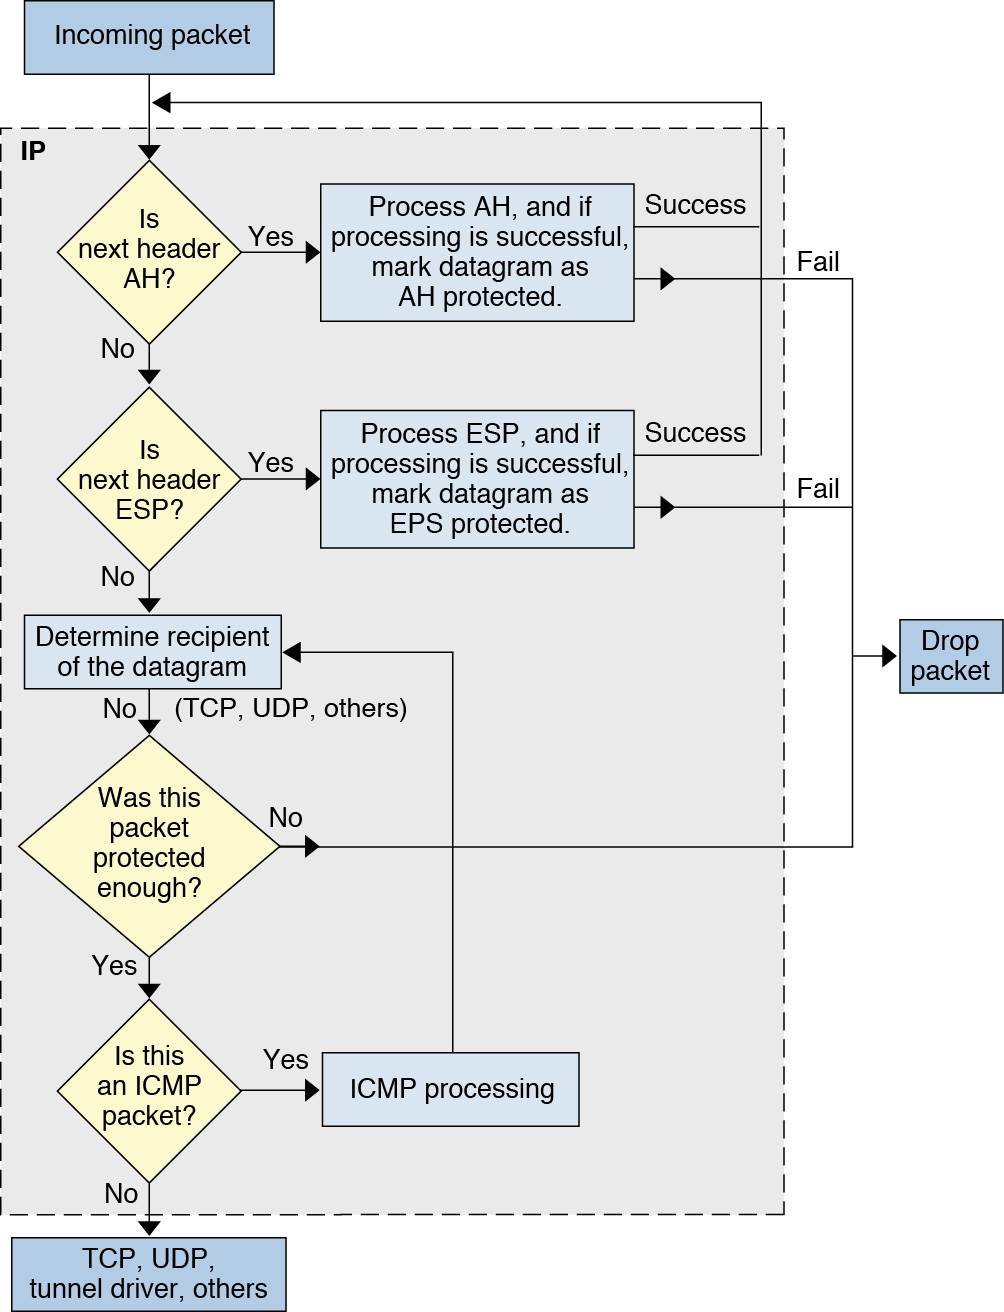 image:Flow diagram shows that IPsec first processes the AH header, then the ESP header on inbound packets. A packet that is not protected enough is dropped.